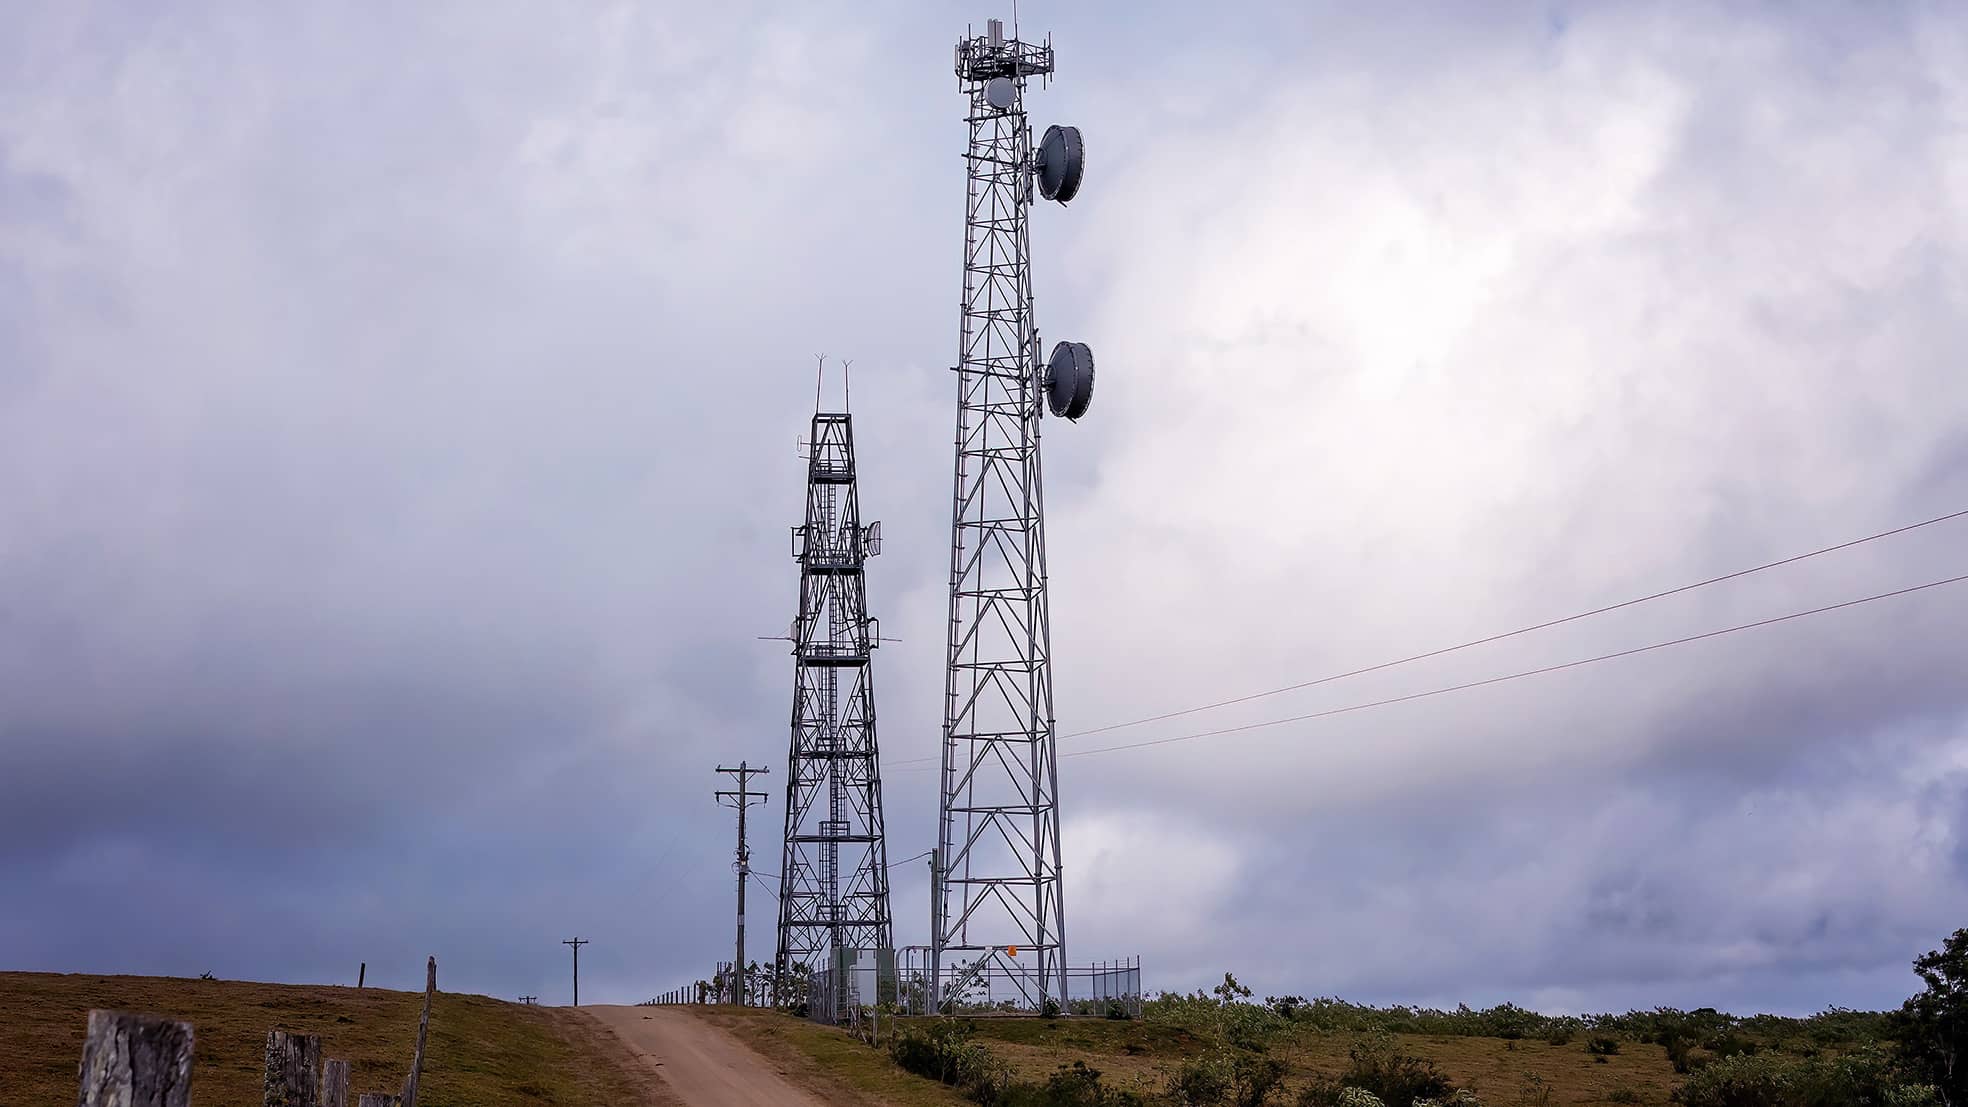 Ringing in changes to improve mobile coverage